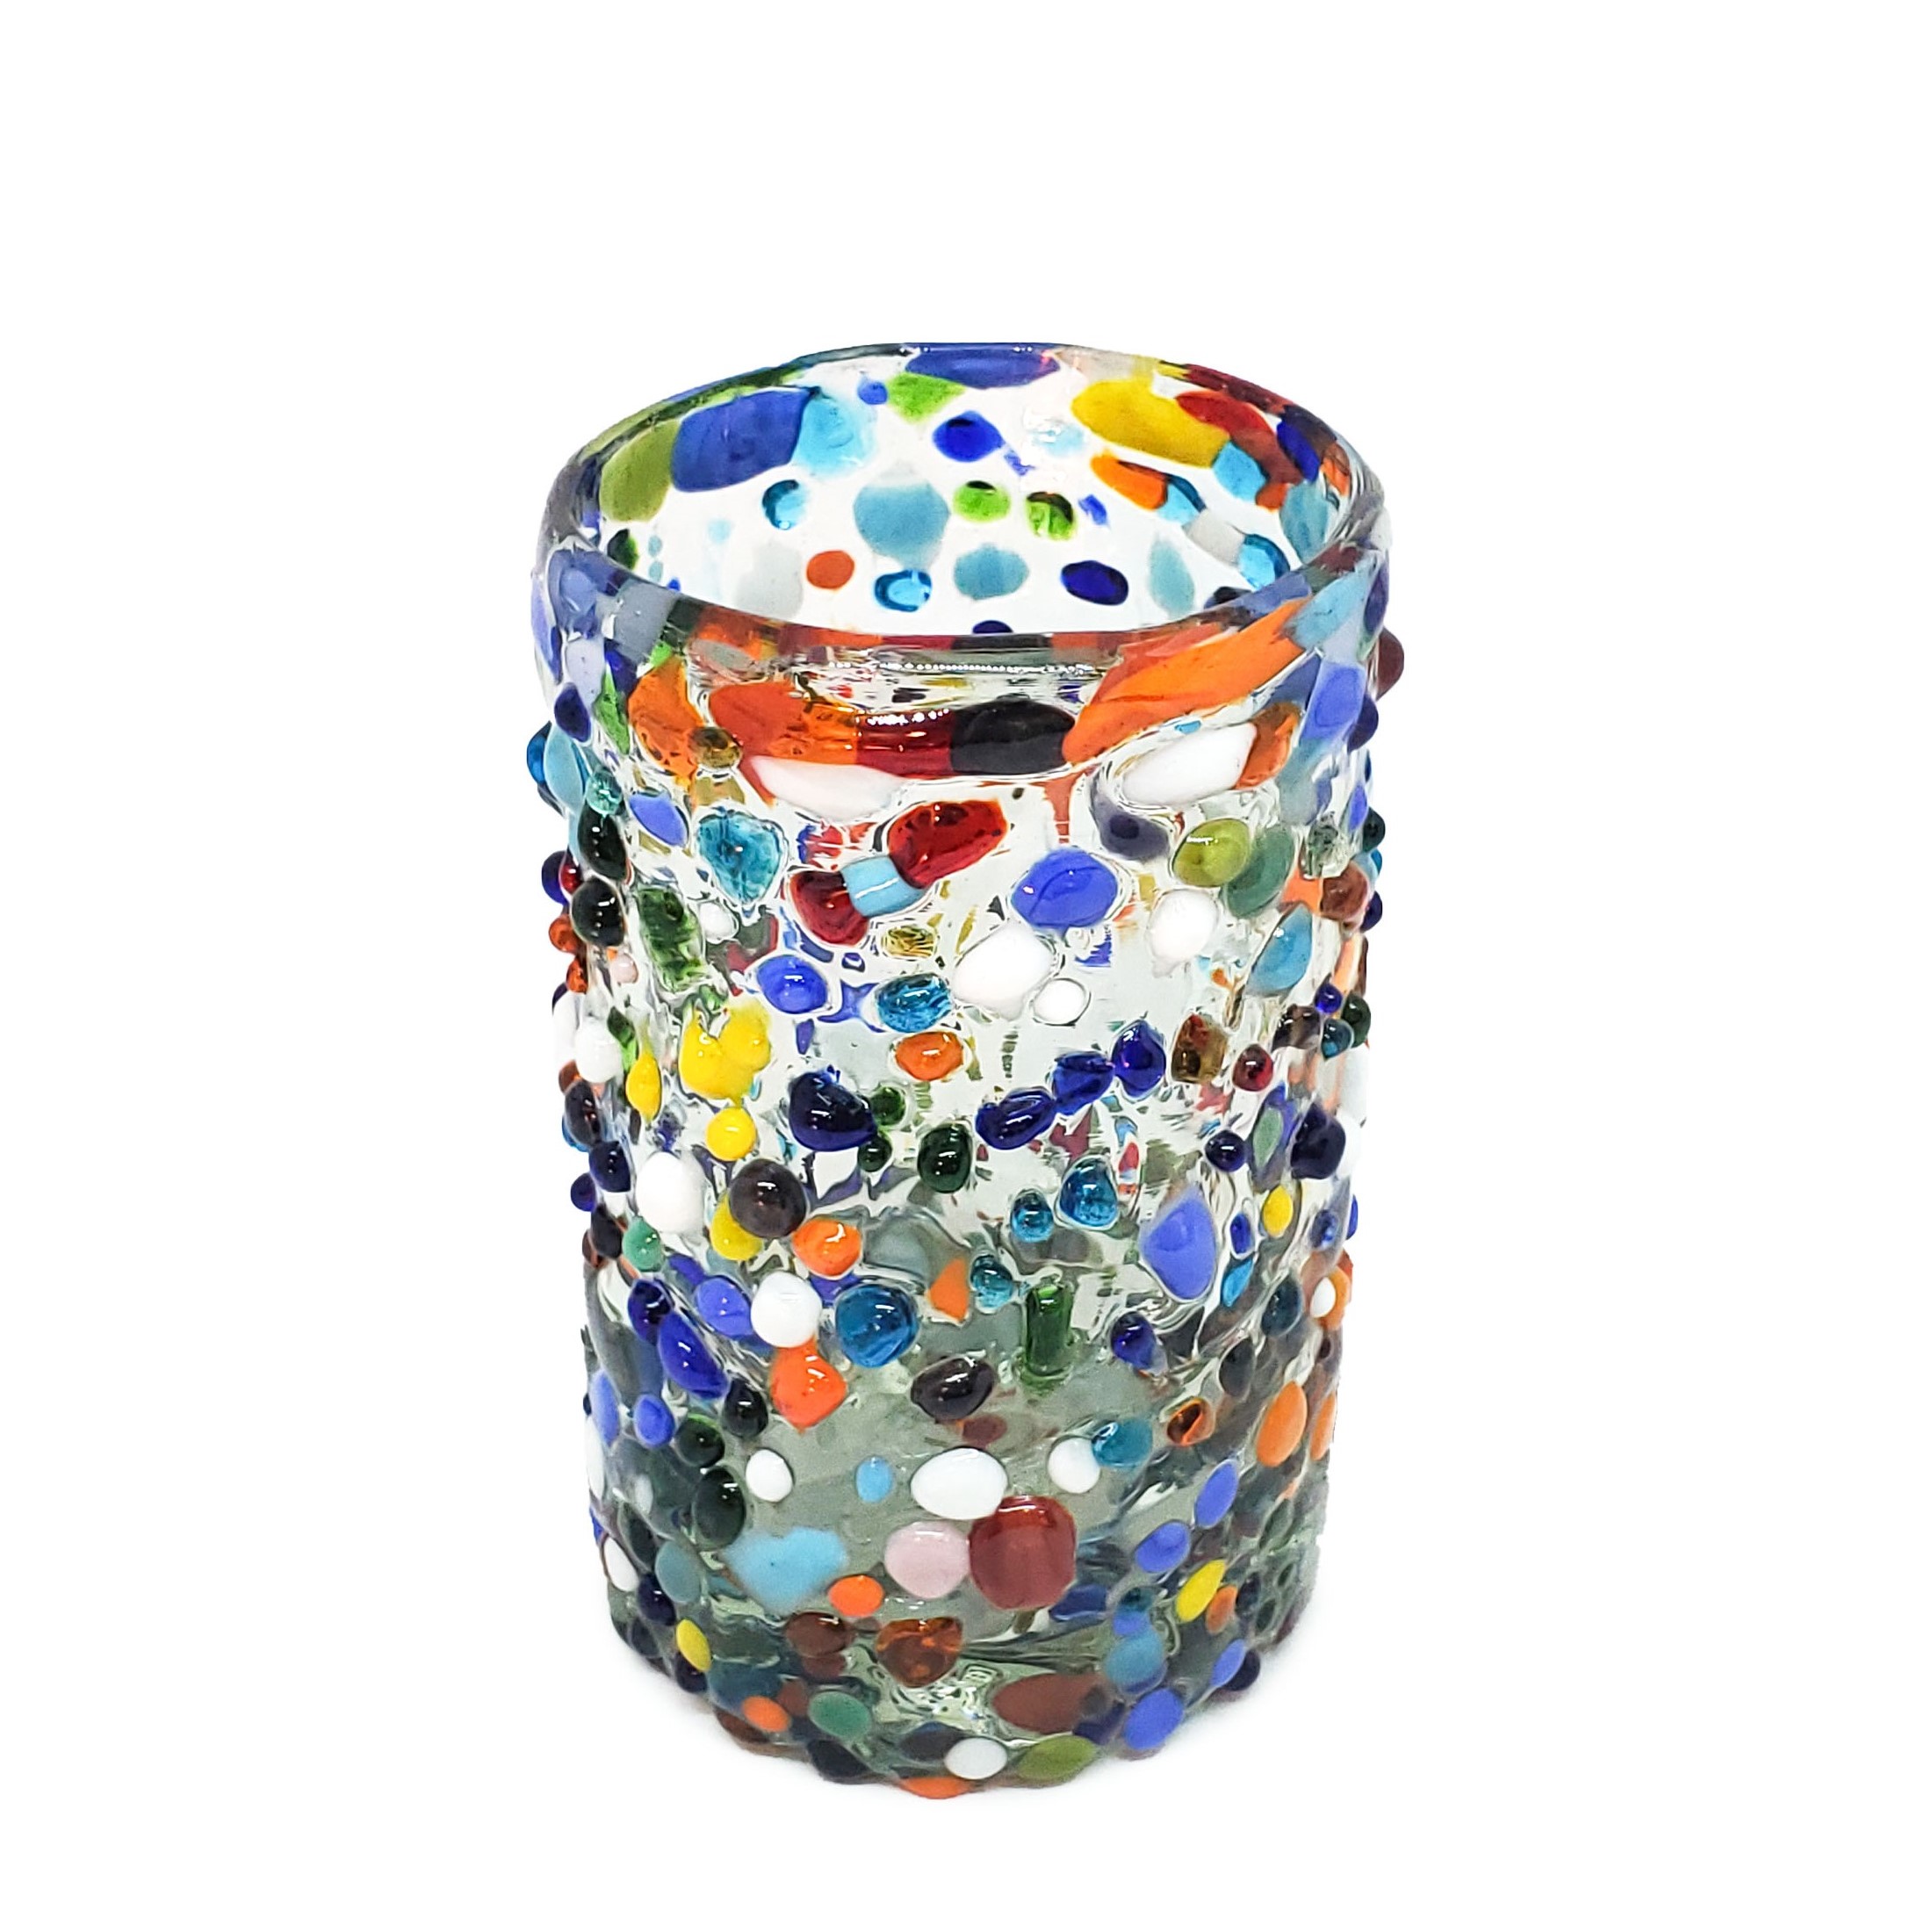 Wholesale Mexican Glasses / Confetti Rocks 9 oz Juice Glasses  / Let the spring come into your home with this colorful set of glasses. The multicolor glass rocks decoration makes them a standout in any place.